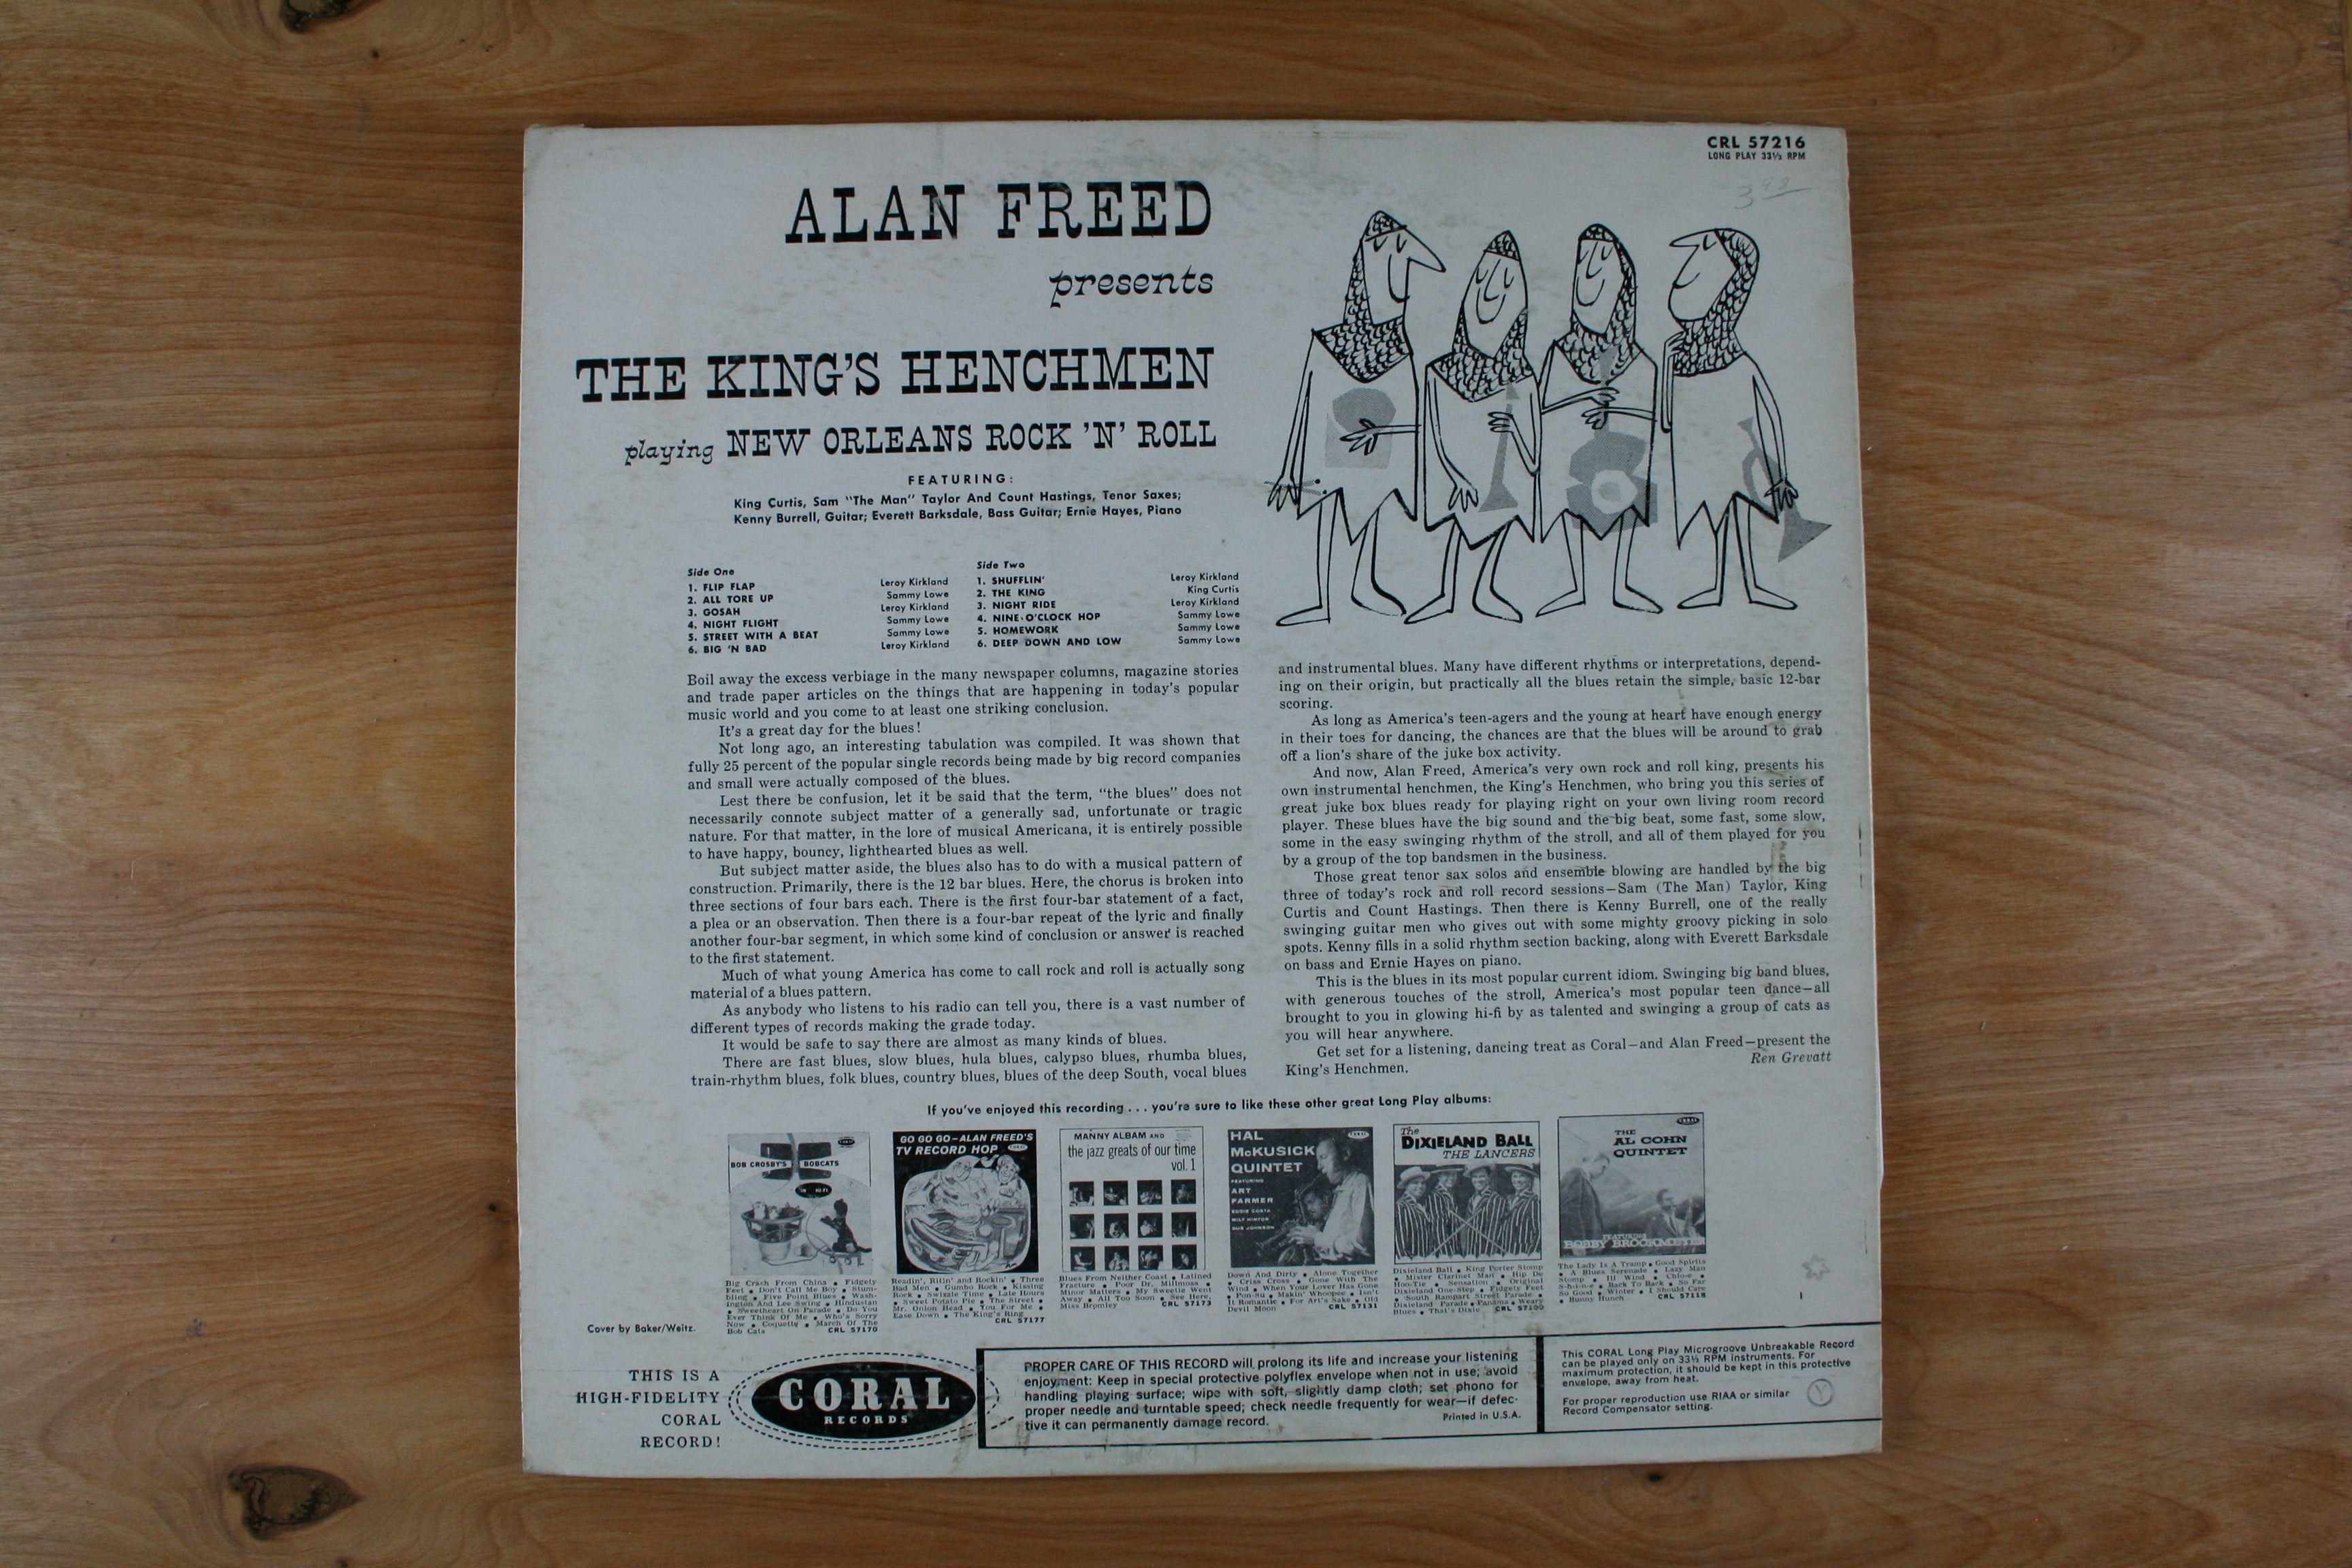 The King's Henchmen - Alan Freed Presents The Kings Henchmen Playing New Orleans Rock and Roll